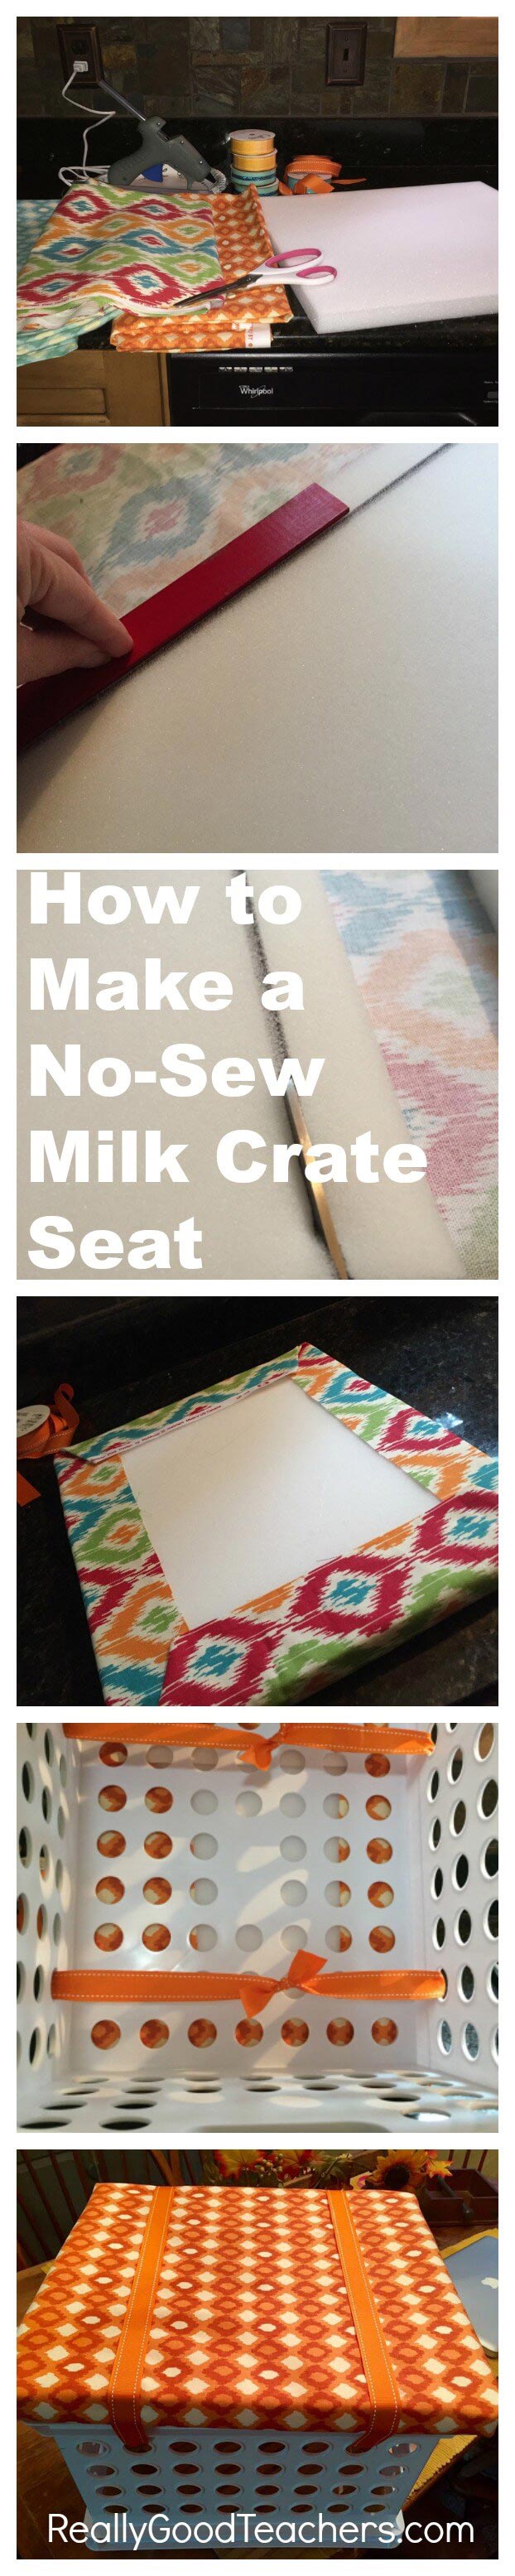 The Making of a Milk Crate Seat